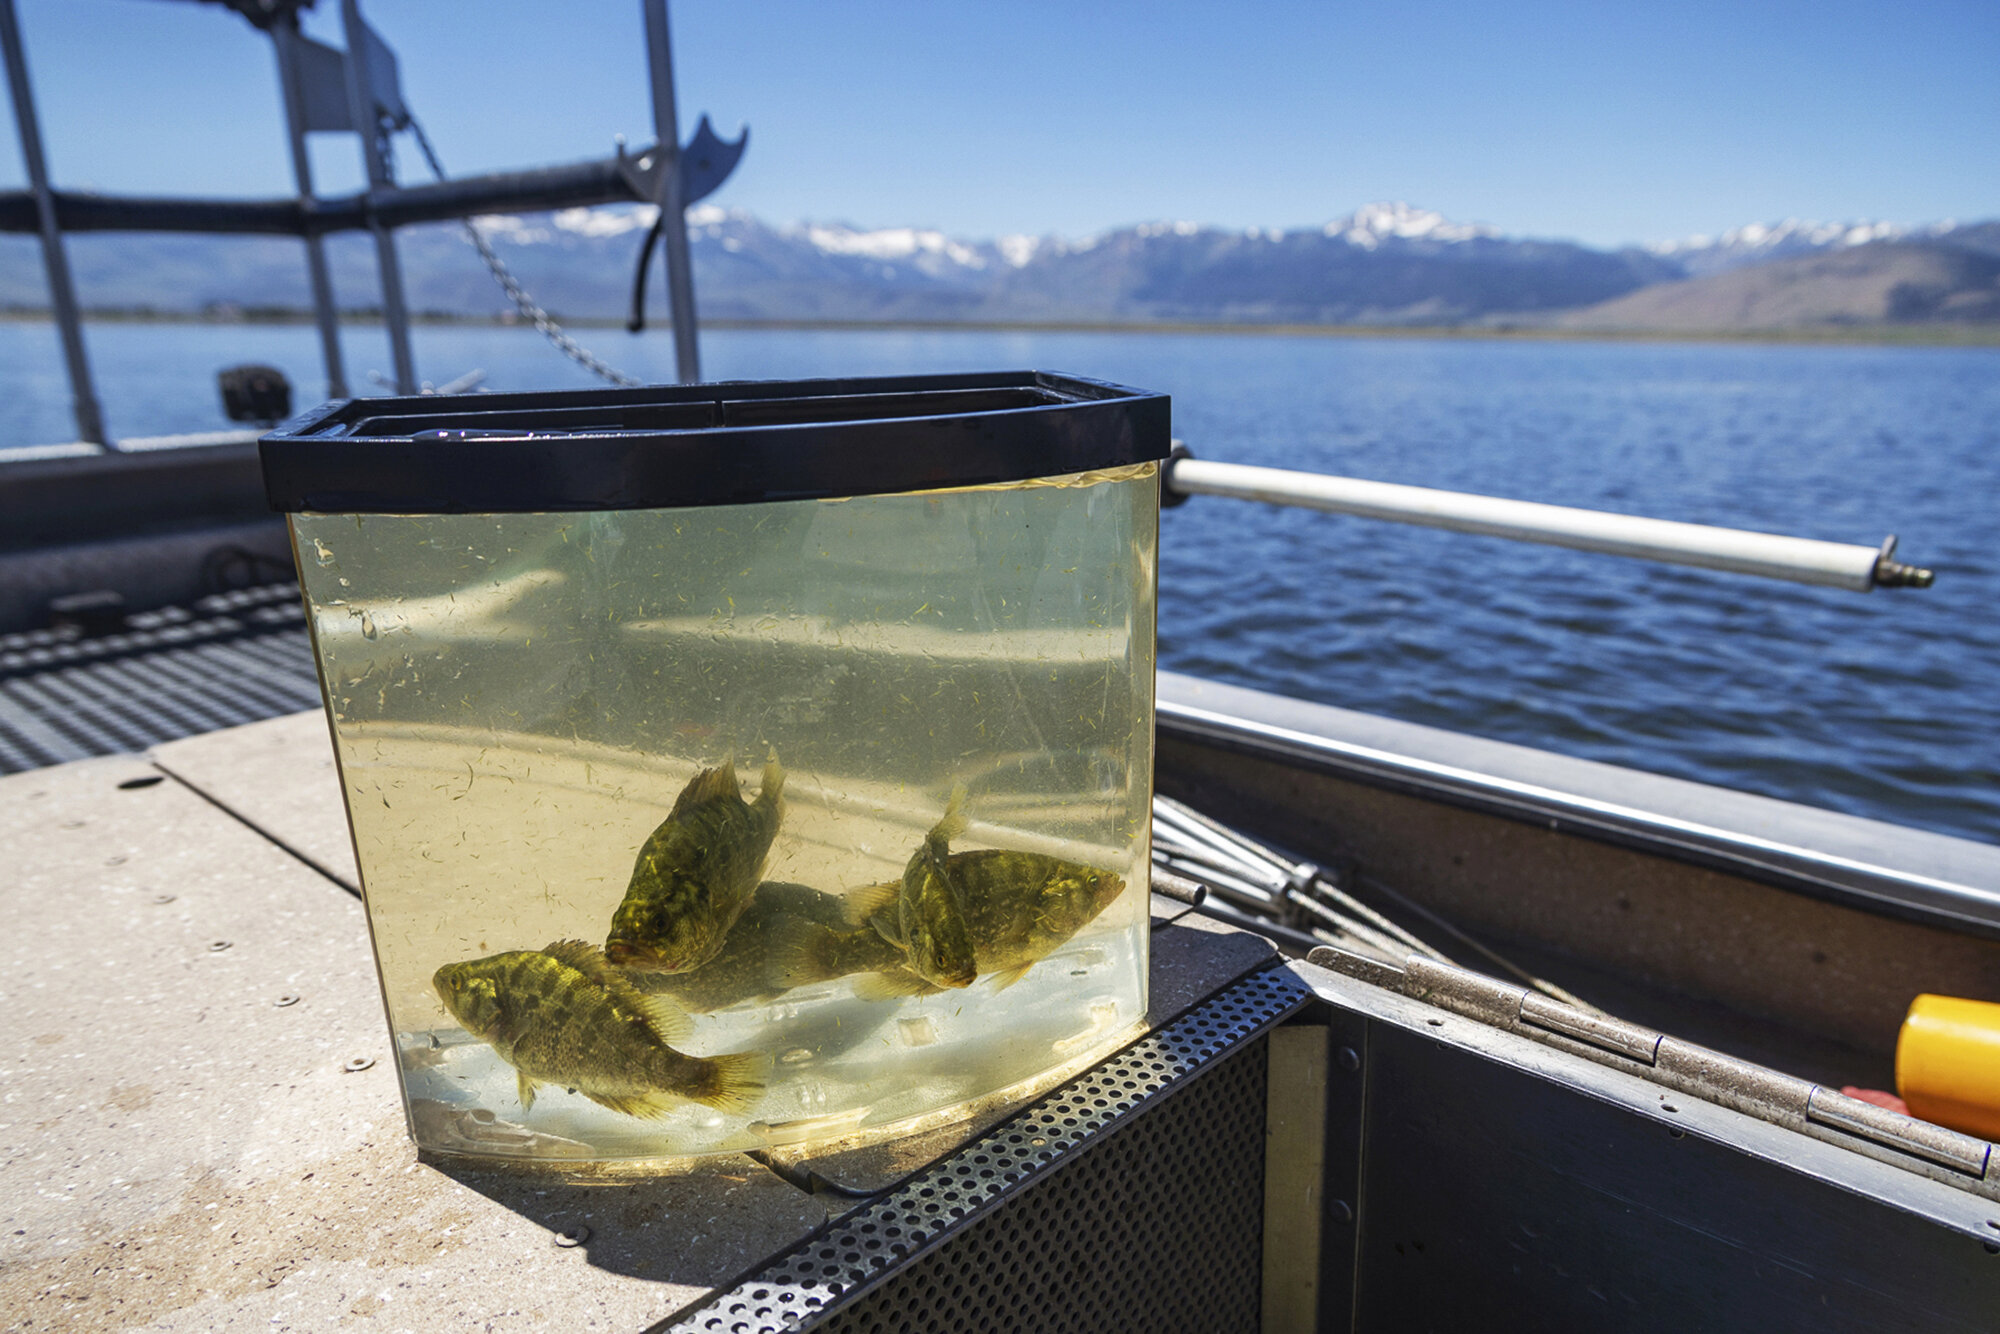 California Outdoors Q&A  What's the best way to release freshwater fish  unharmed?